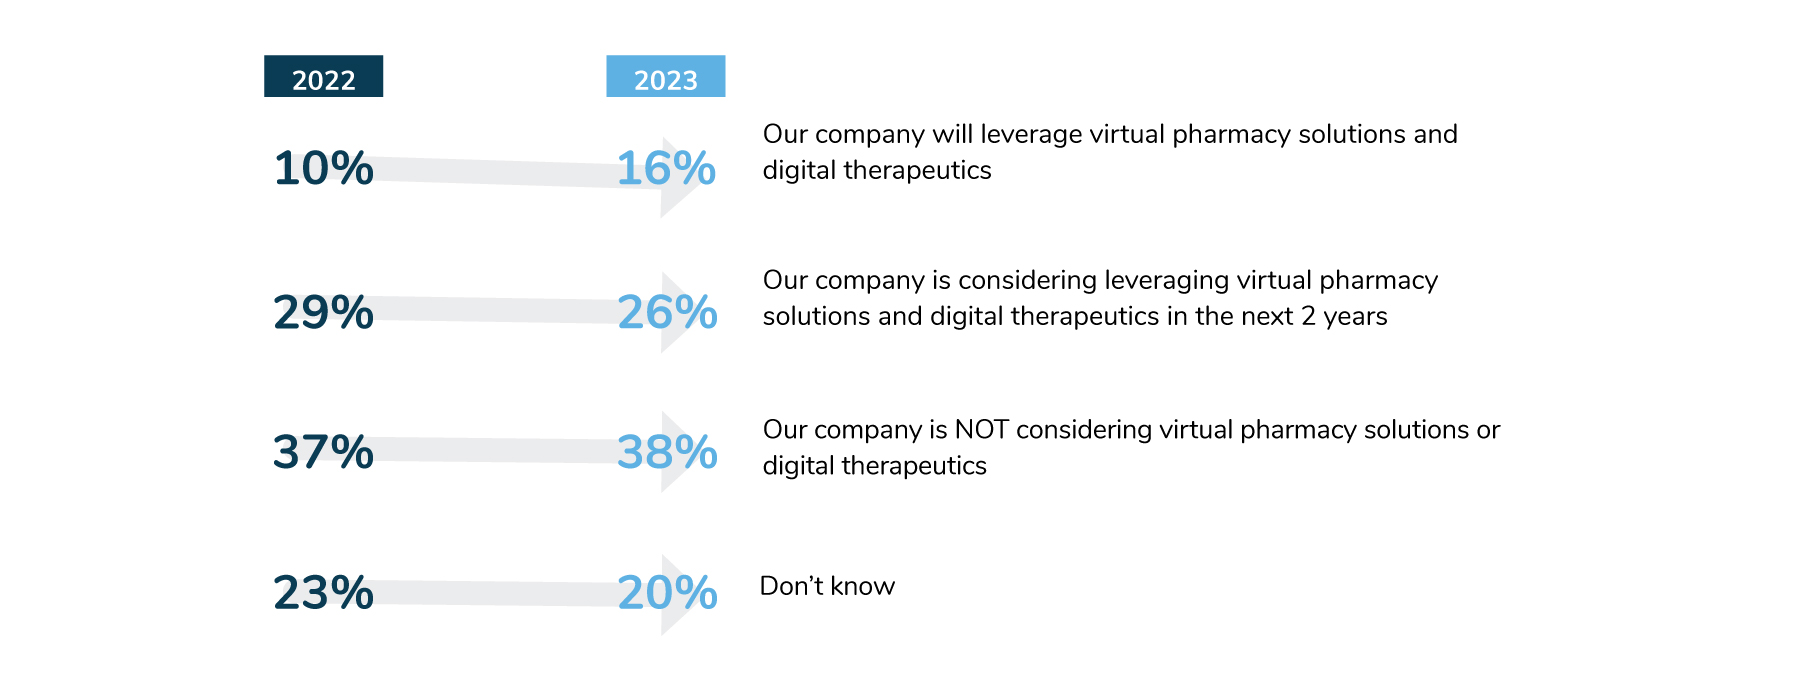 16% will leverage virtual pharmacy solutions or digital therapeutics (up from 10% in 2022). Another 26% are considering doing so by 2025. 